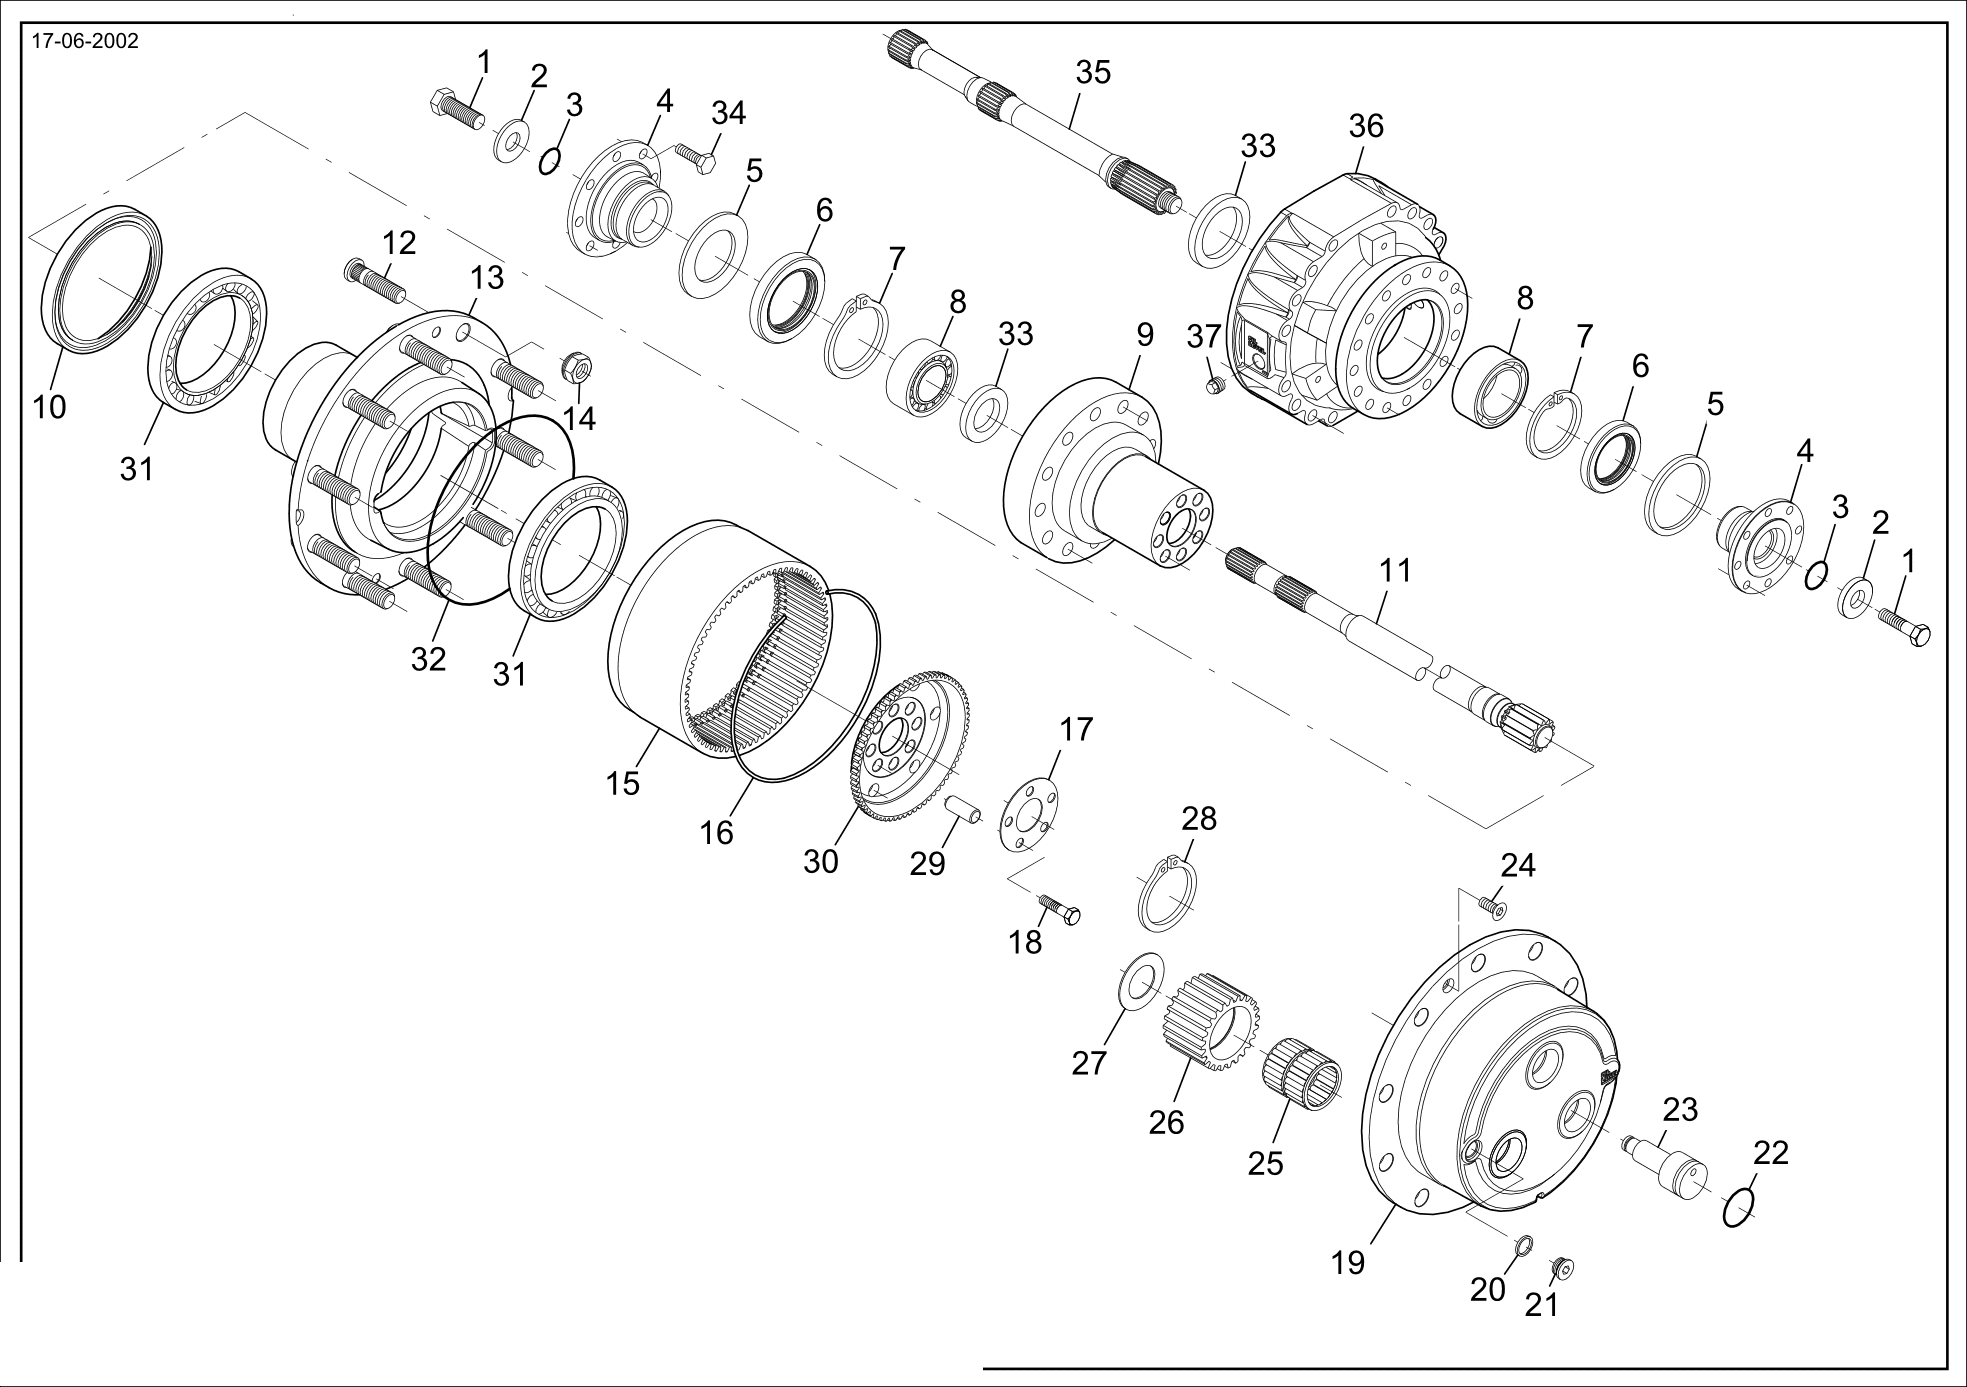 drawing for CNH NEW HOLLAND 71486326 - LOCKING PLATE (figure 3)